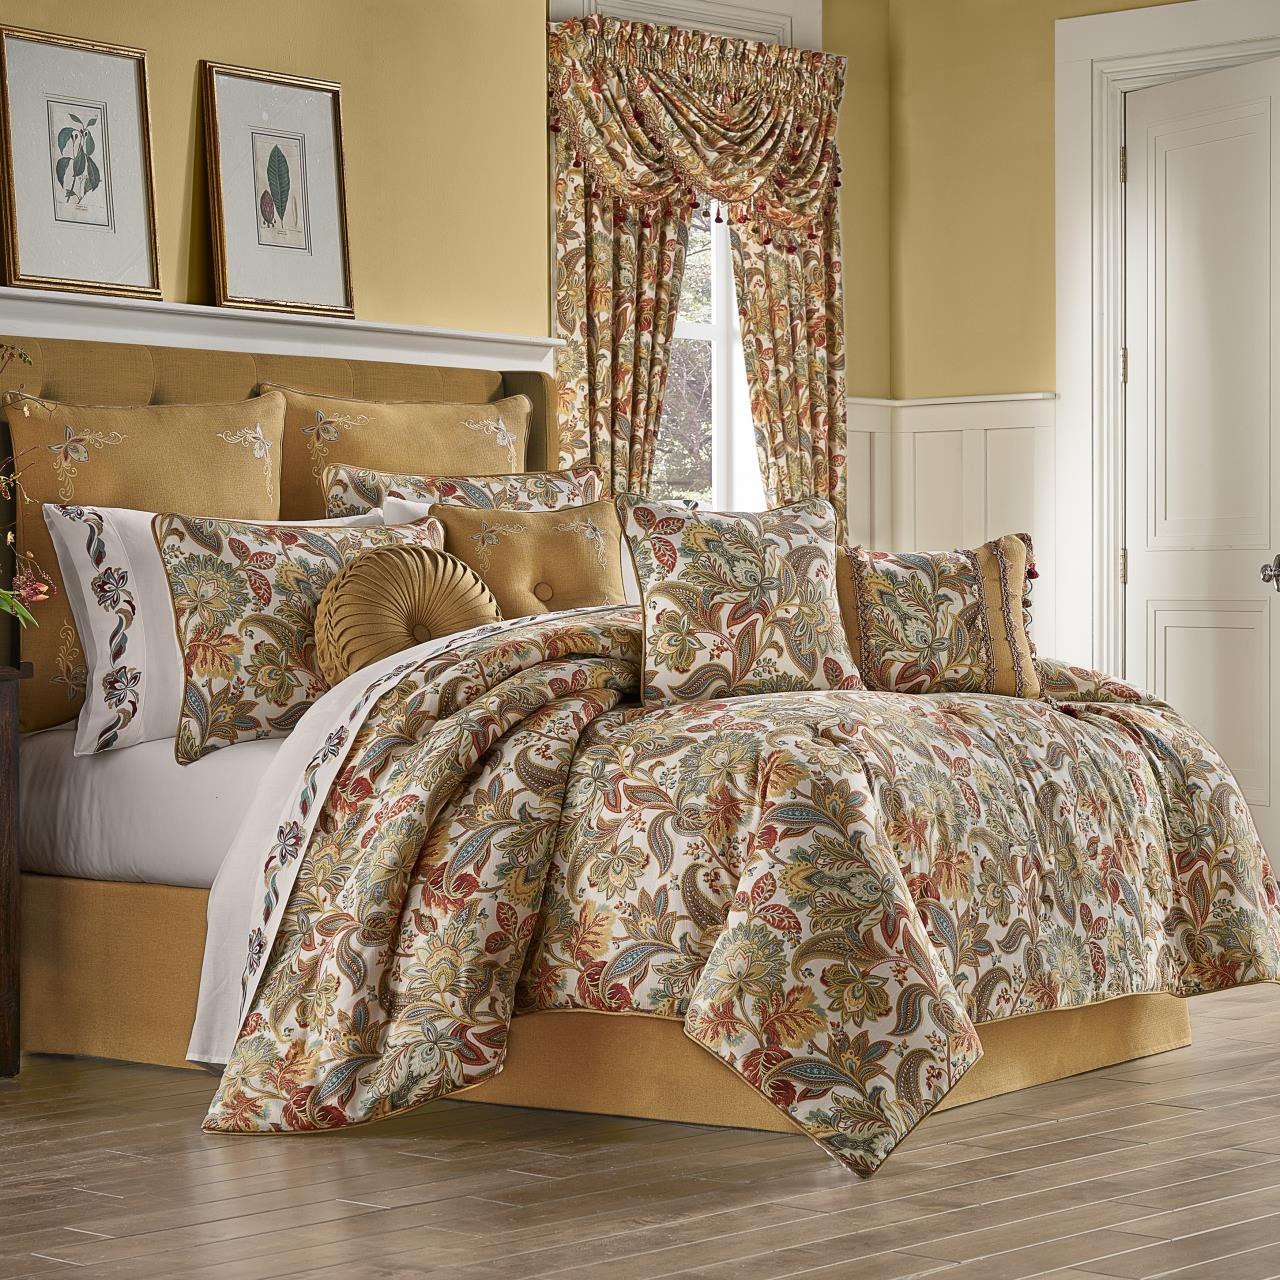 August Comforter Collection -